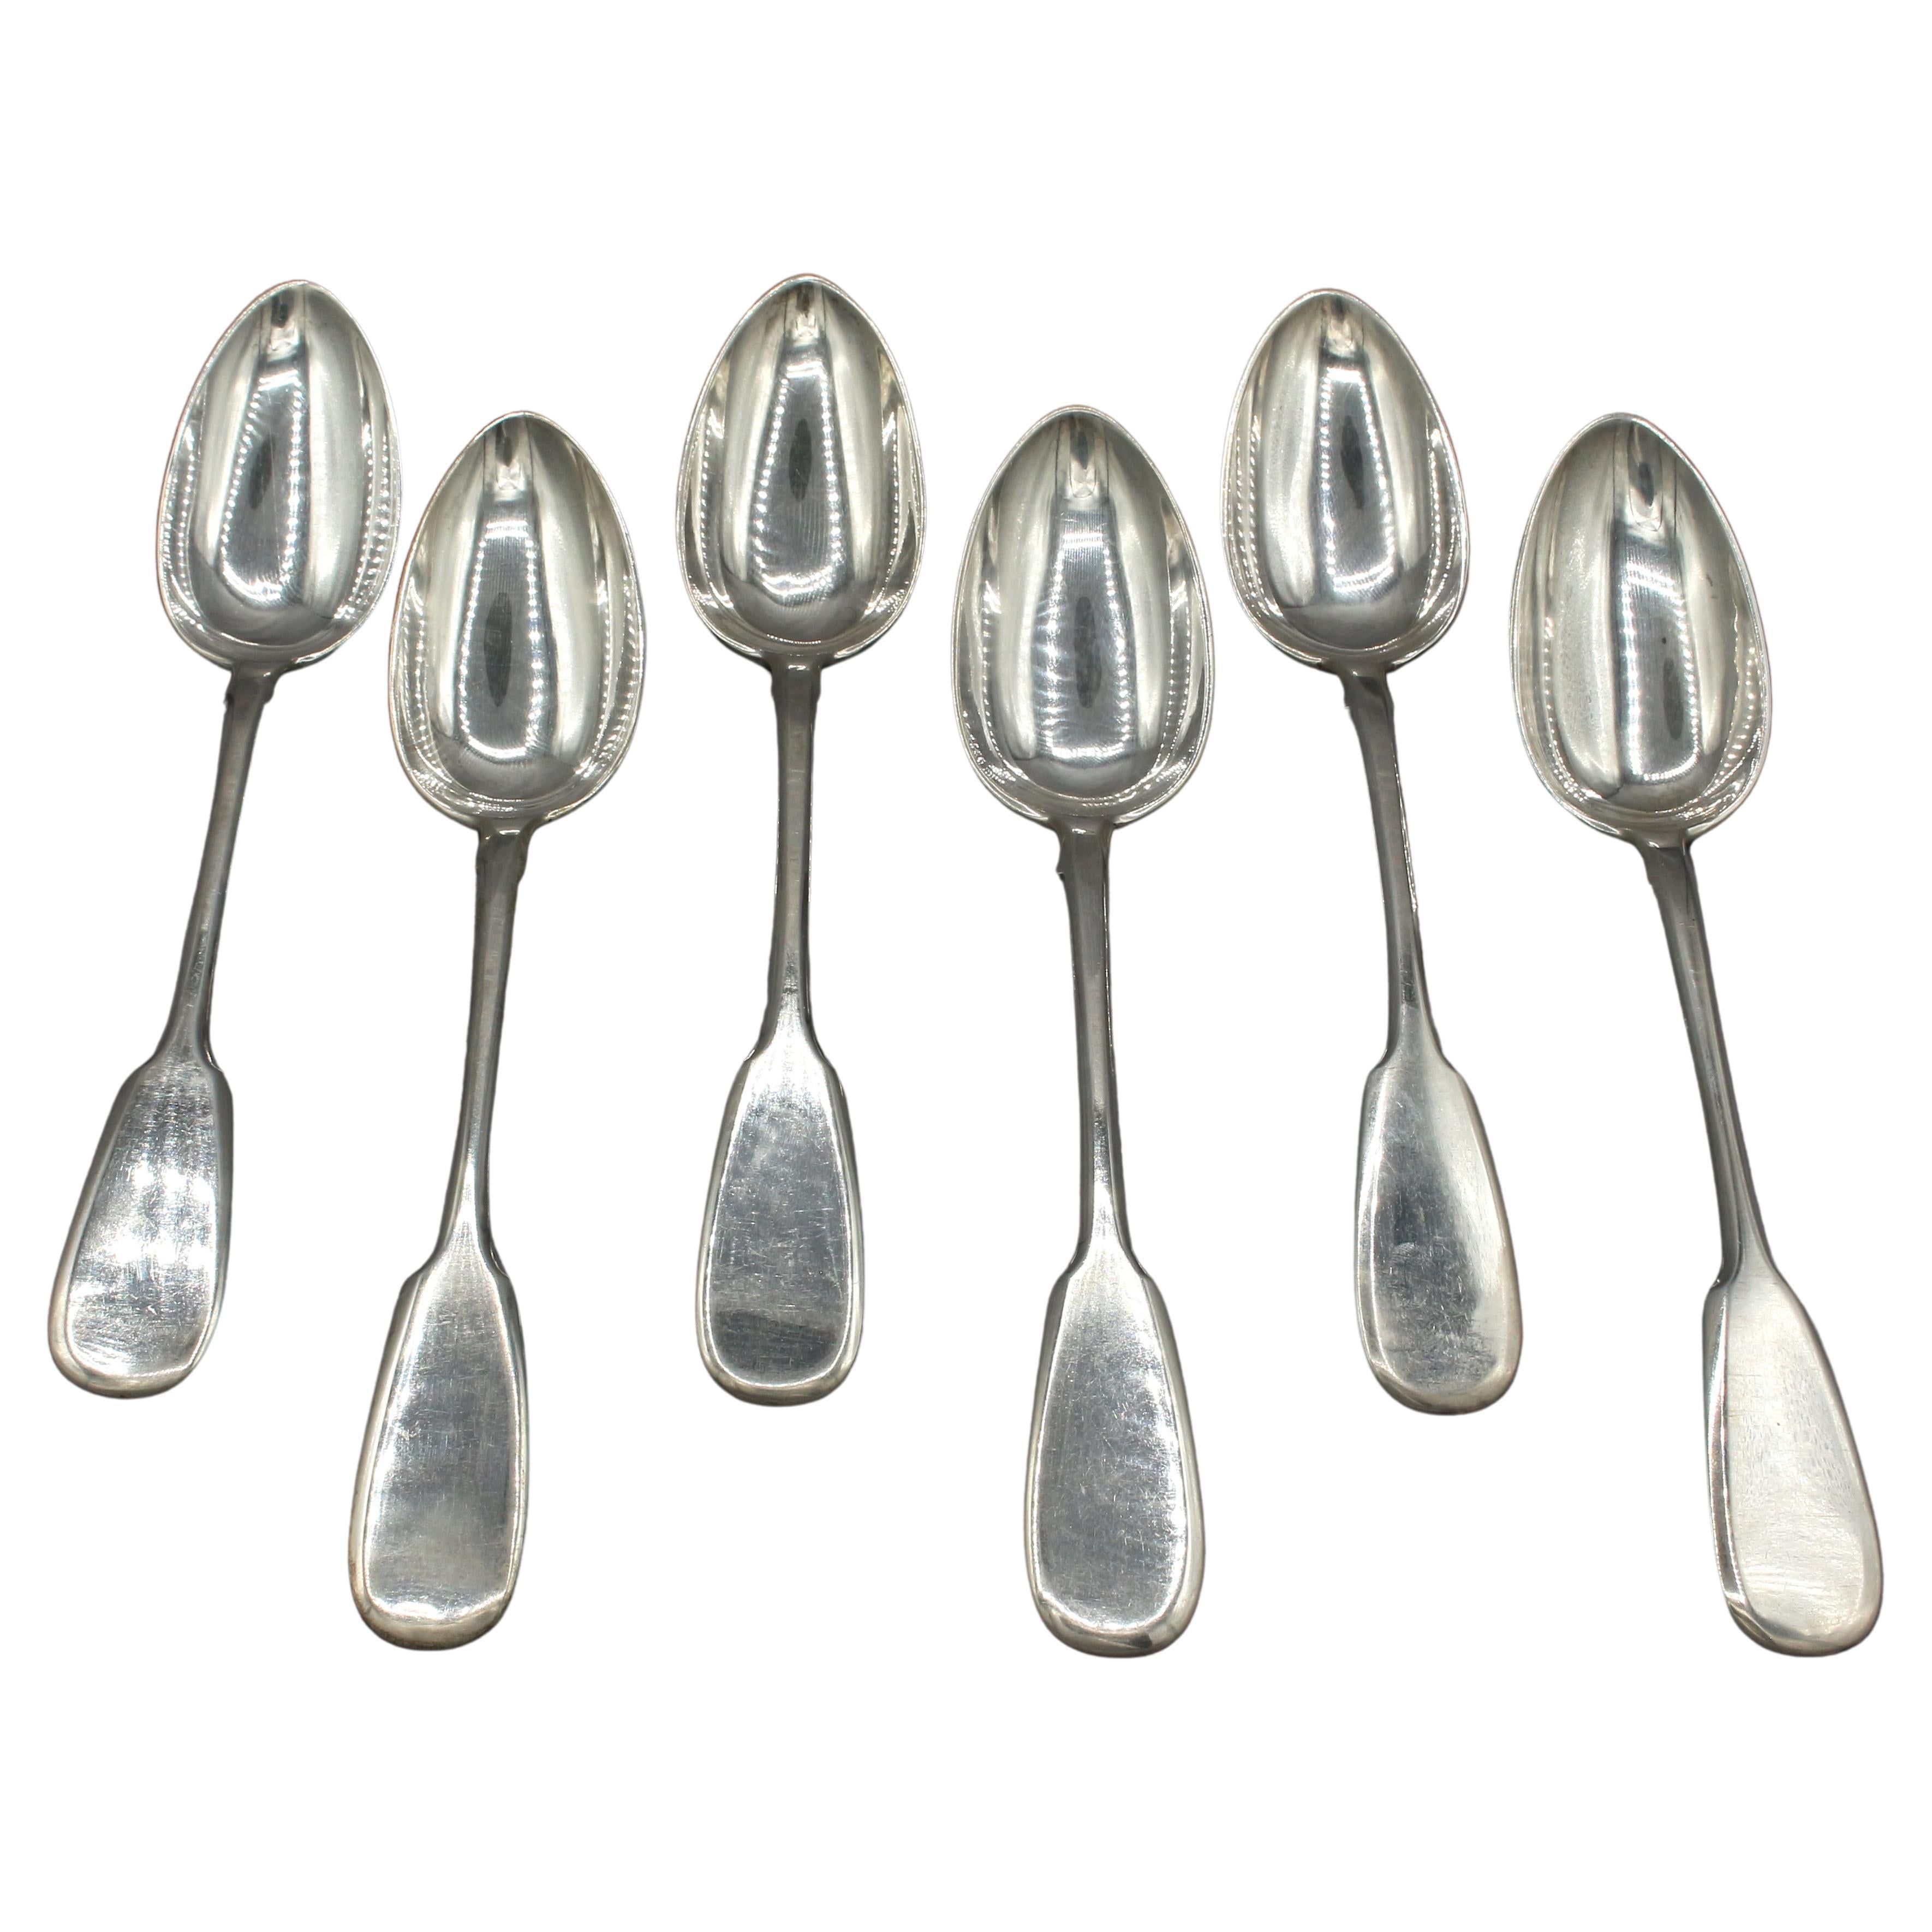 Set of 6 Faberge 84 Zolotniks (.875) Standard Silver Tablespoons, circa 1880 For Sale